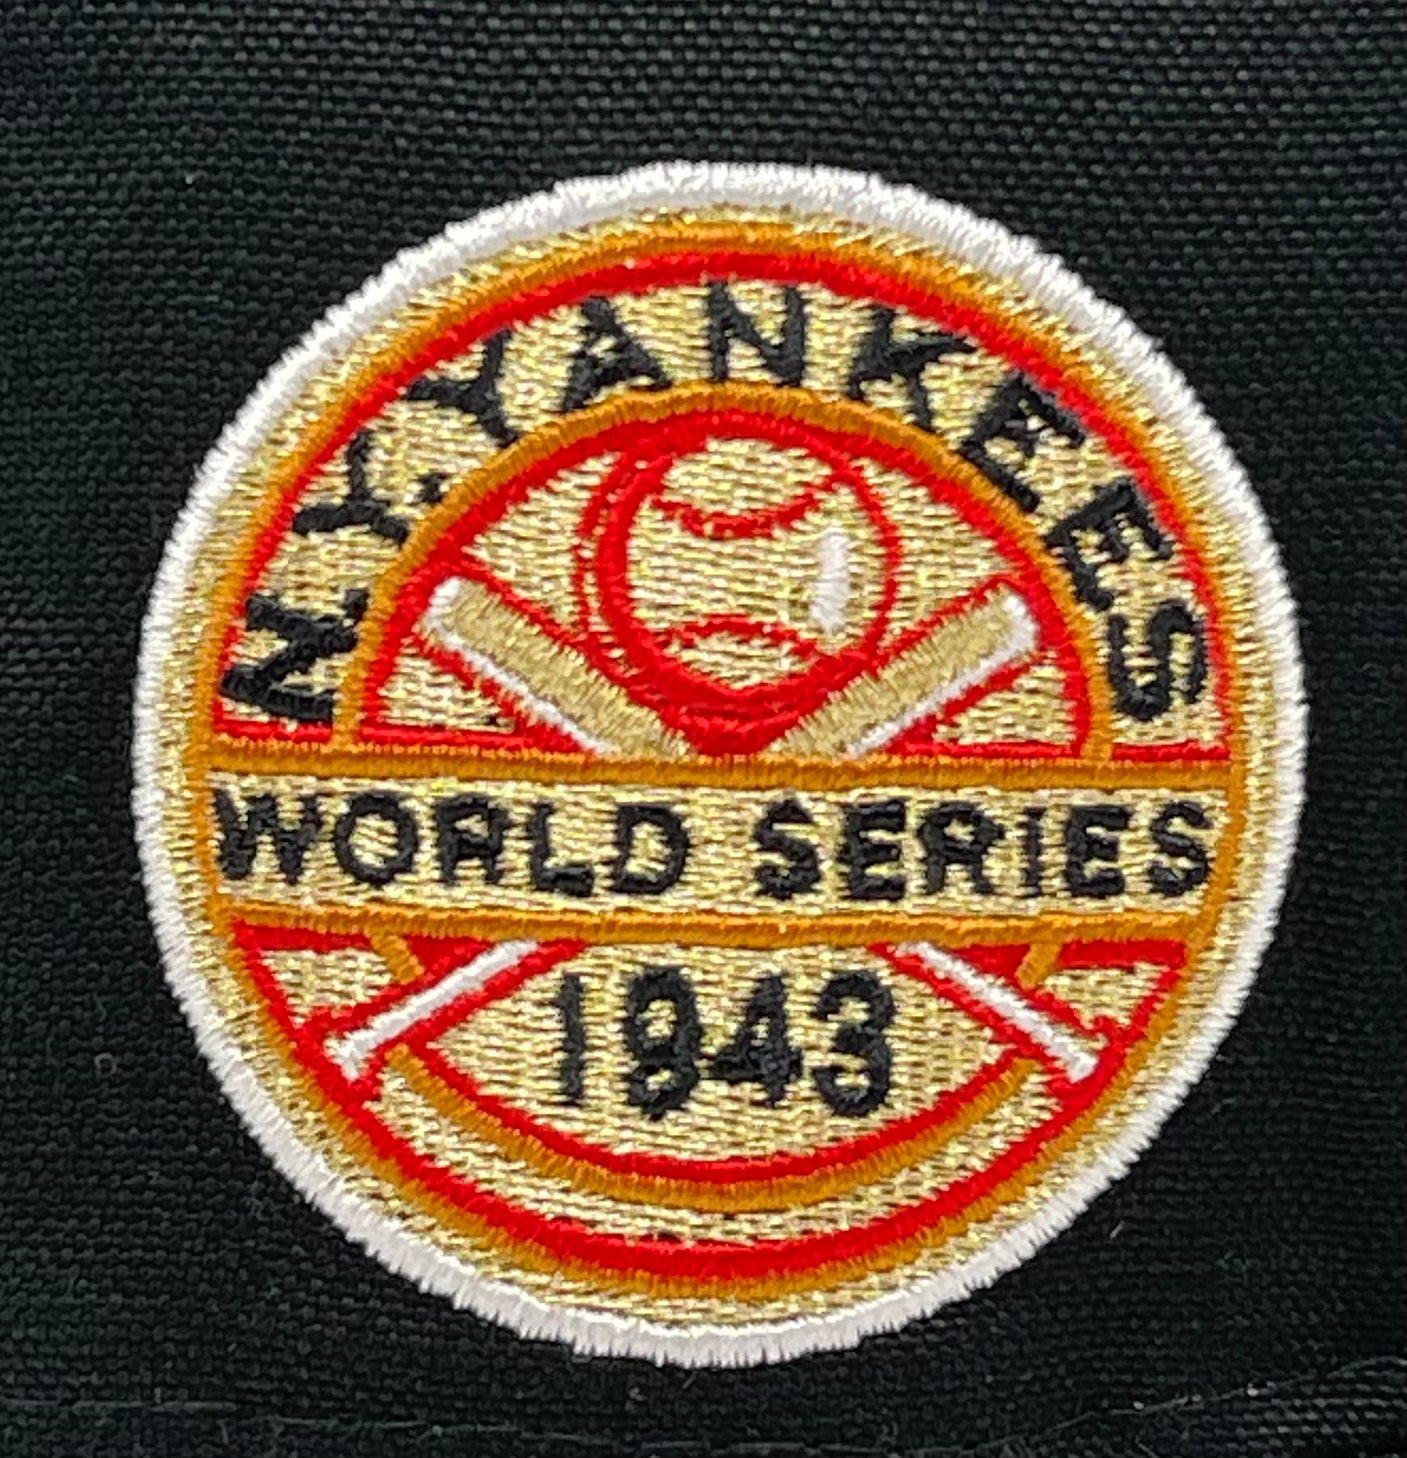 NEW YORK YANKEES (BLACK) (1943 WORLD SERIES) NEW ERA 59FIFTY FITTED (RED UNDER VISOR)